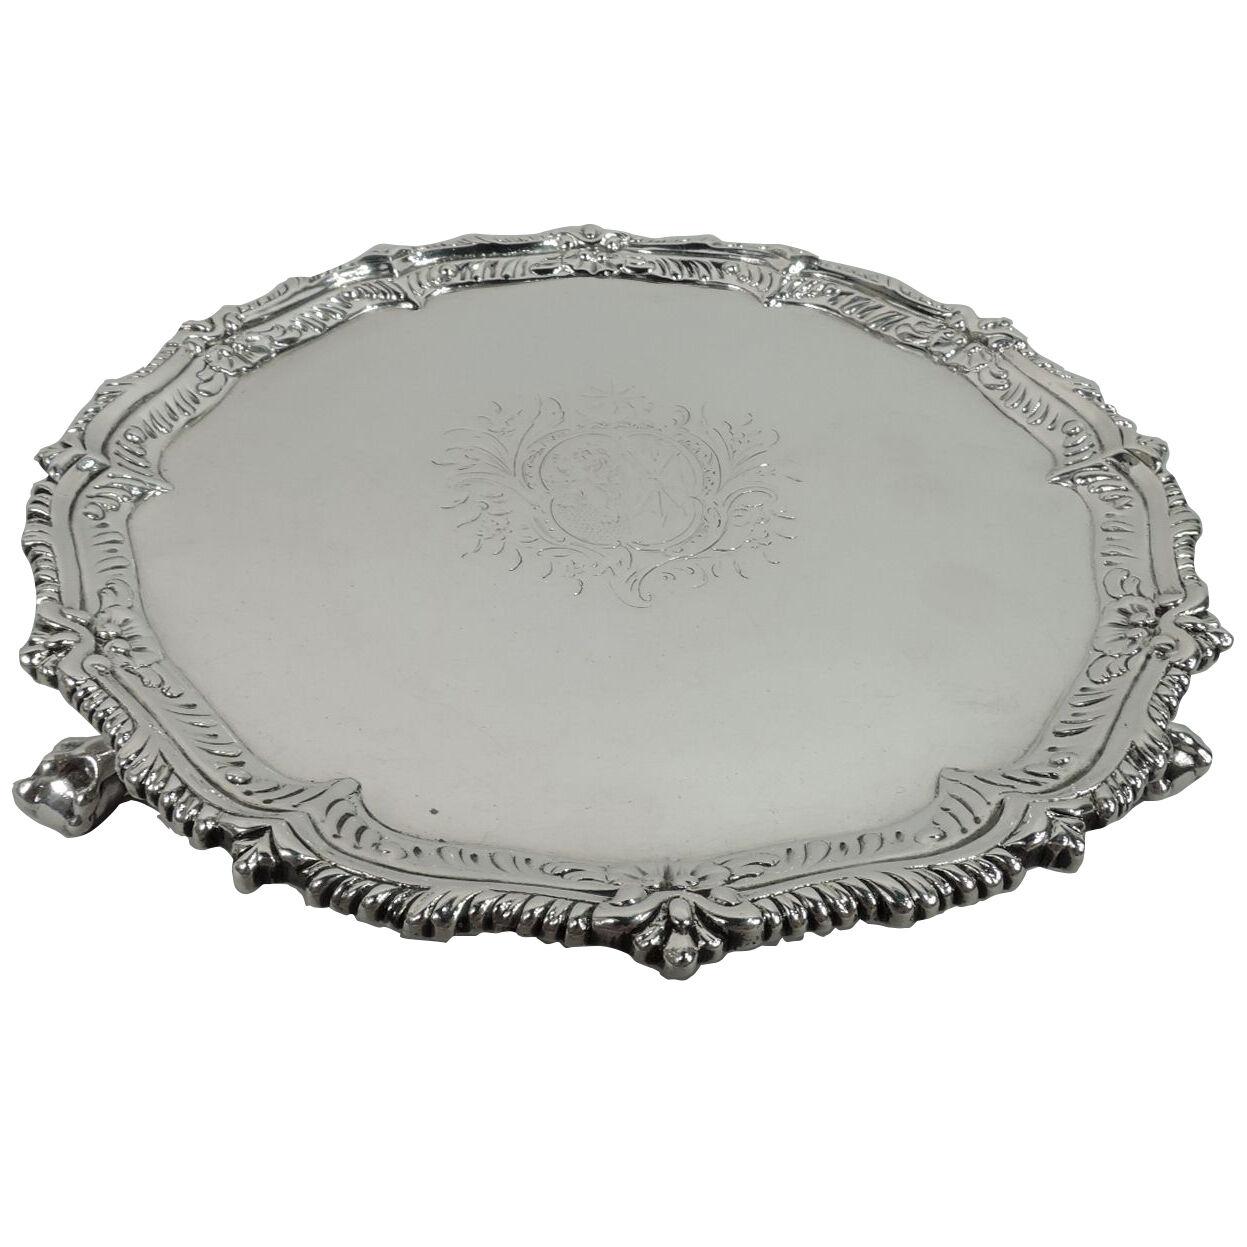 Excellent English Georgian Sterling Silver Salver Tray by Rew 1770